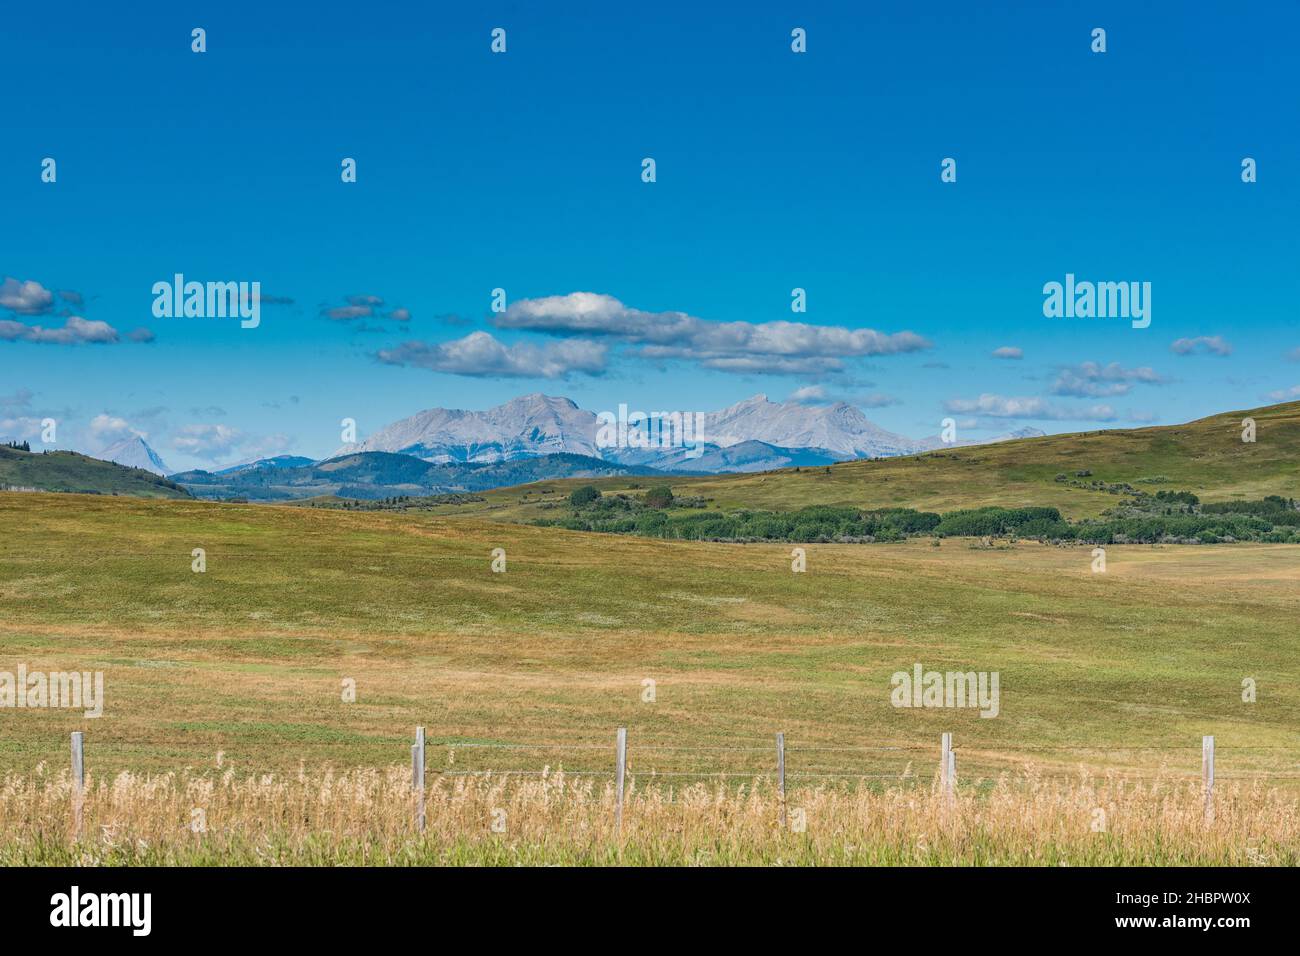 Scenic farmland in the prairies and foothills at the base of the Rocky Mountains in Alberta Canada Stock Photo